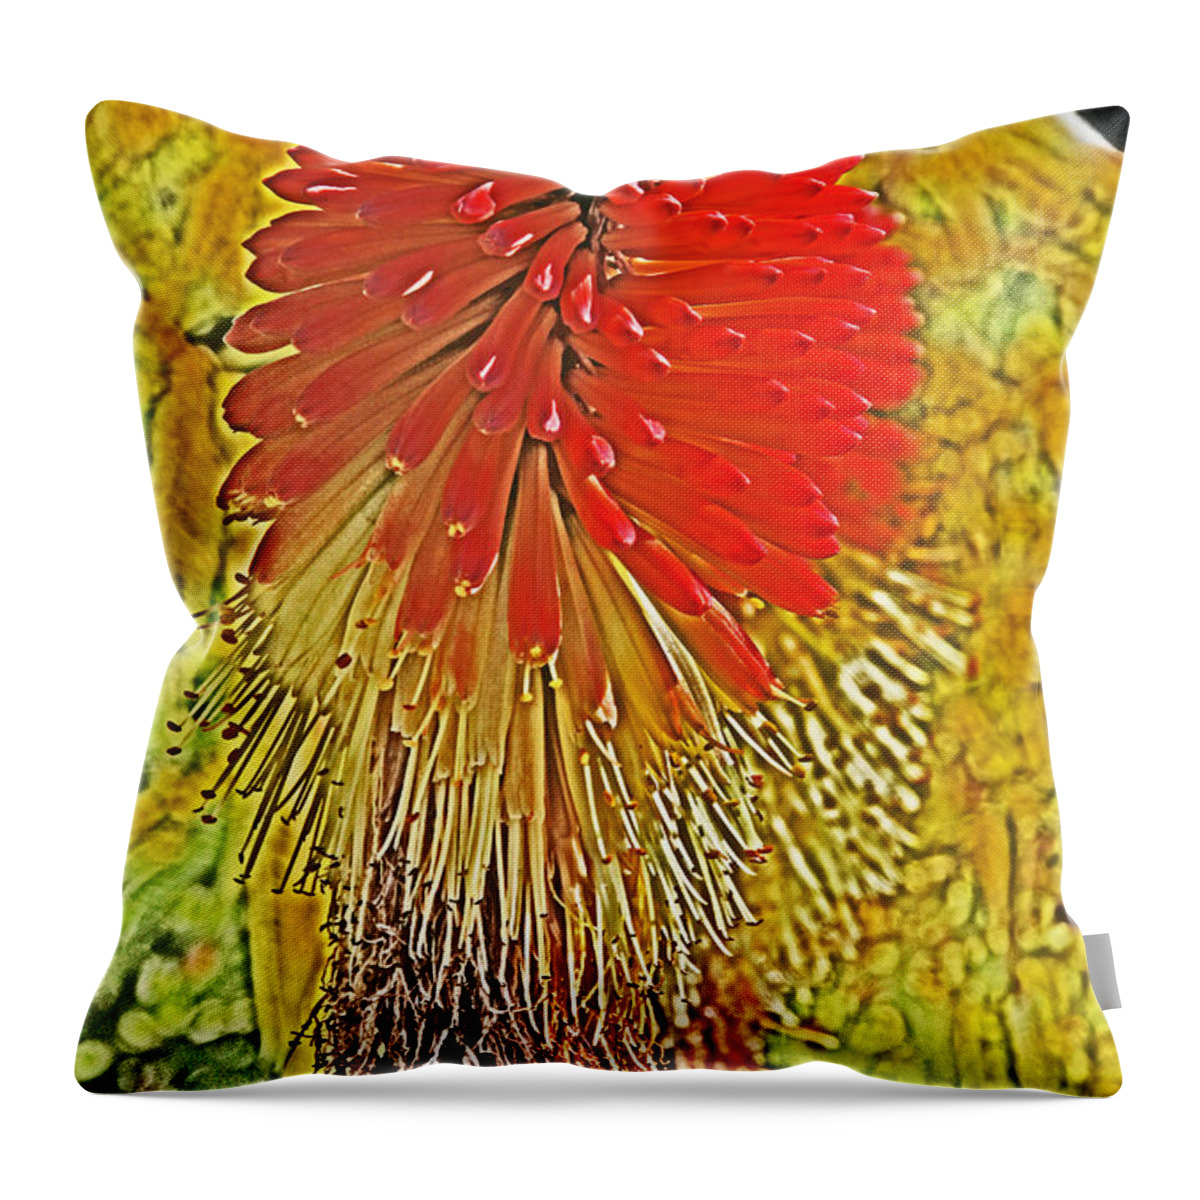 Flower Throw Pillow featuring the photograph Hot Poker Flower Stylized by David Frederick